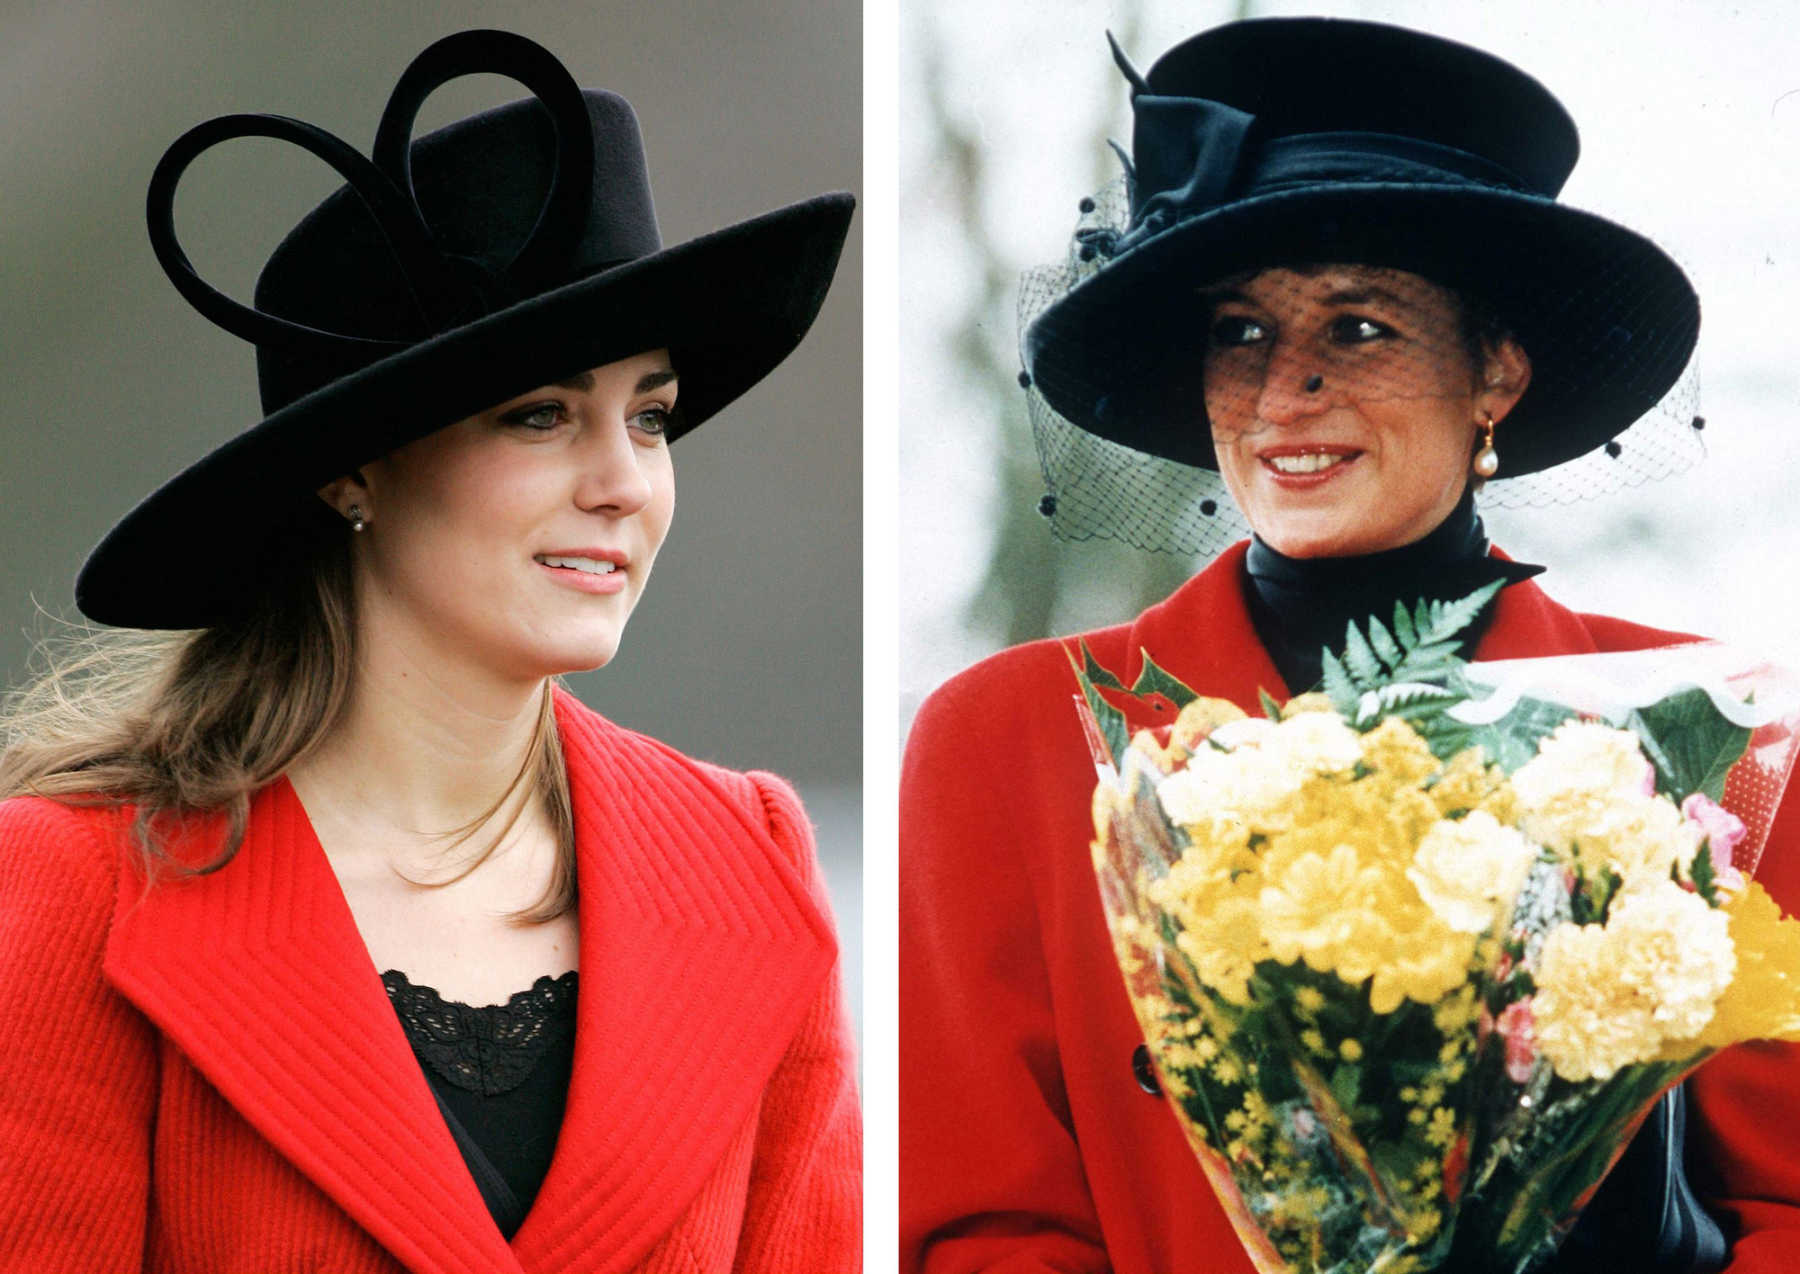 Kate Middleton wears matching houndstooth coat to Princess Diana